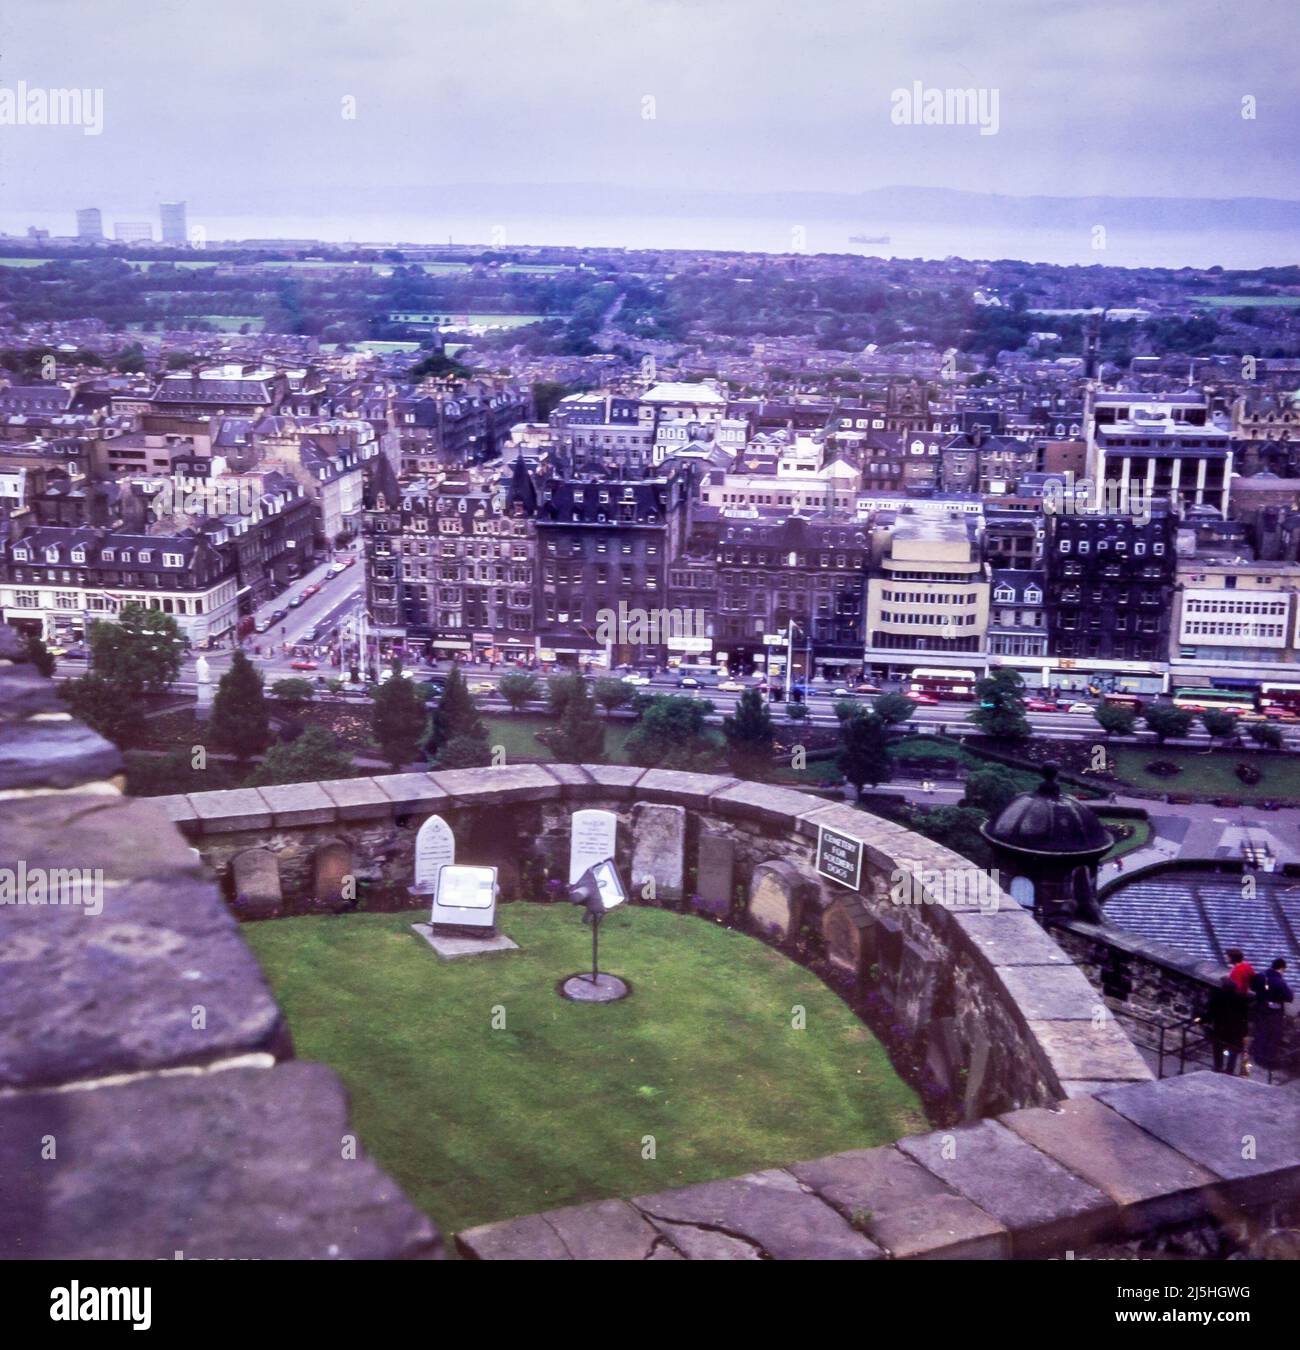 Edinburgh Castle Dog Cemetery 1978. This cemetery is the final resting place for regimental mascots or honoured dogs belonging to high-ranking soldiers. It is found in the grounds of Edinburgh castle and is referred to in a verse by Robert Burns. Stock Photo